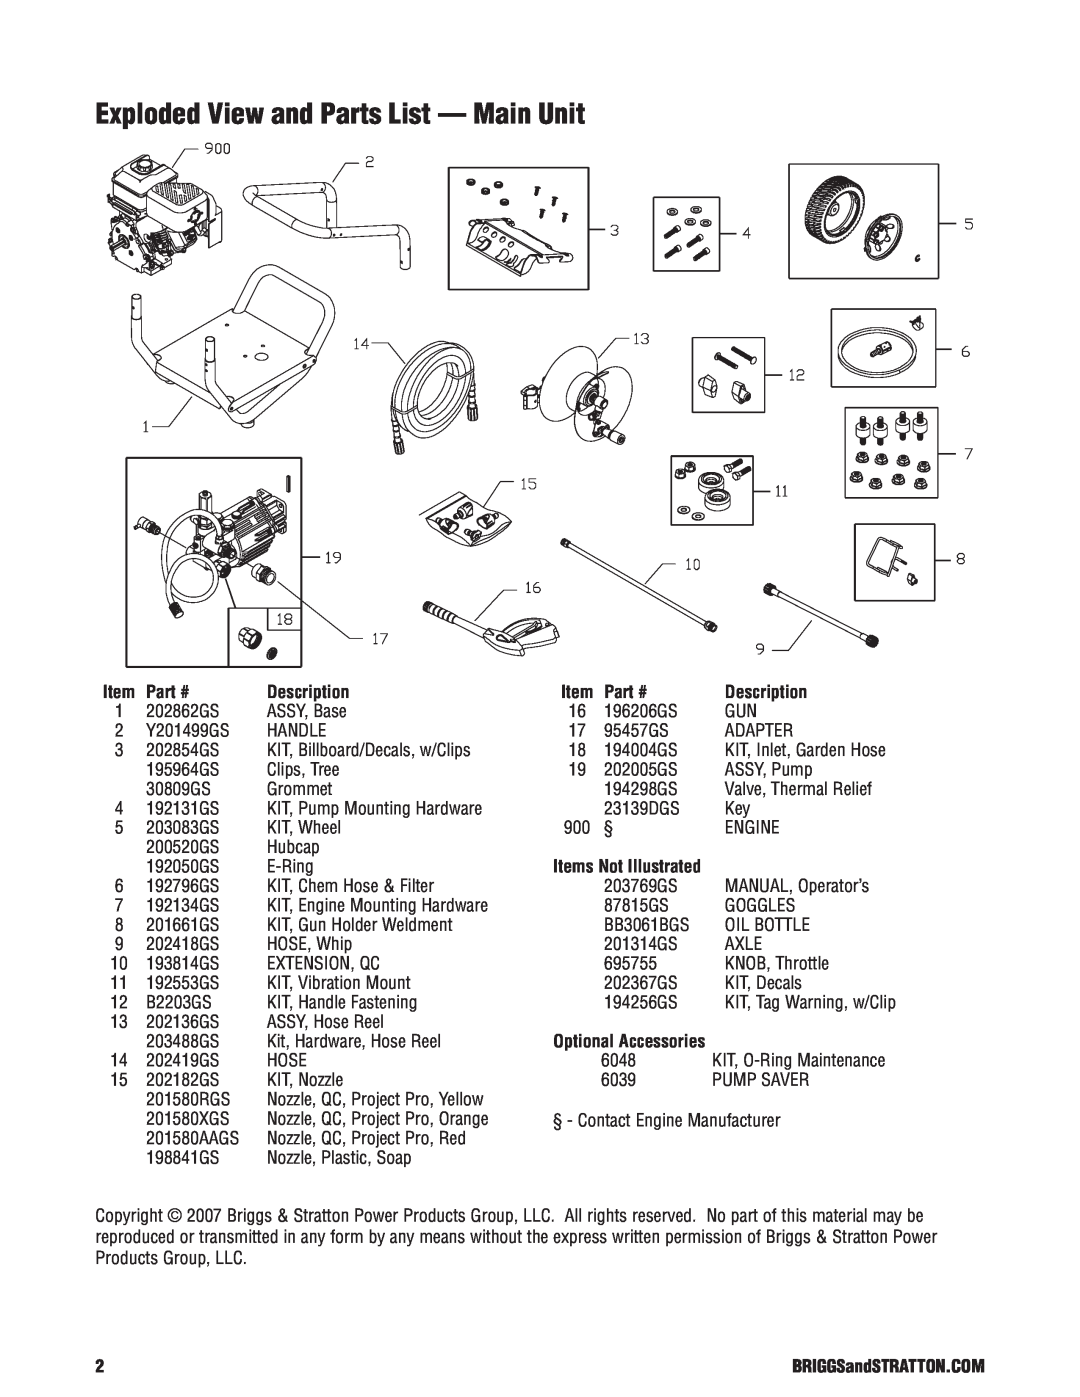 Briggs & Stratton 20275 manual Exploded View and Parts List - Main Unit, Description 